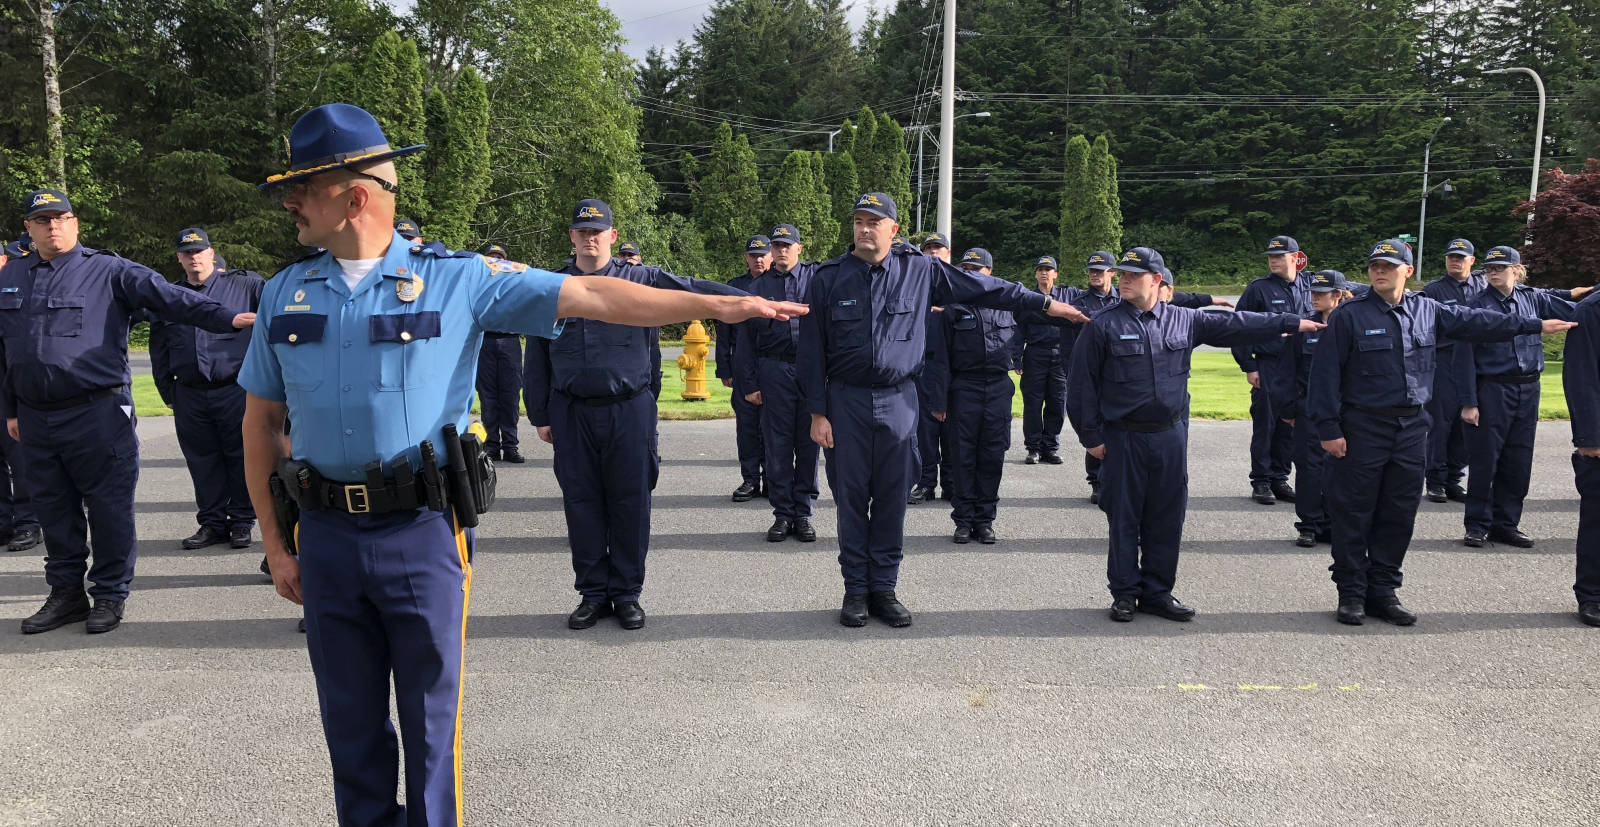 Sgt. Eric Spitzer, deputy commander of the Alaska Law Enforcement Training Academy, leads recruits in training exercises on July 30, 2018, the first day of training at the Public Safety Training Academy in Sitka, Alaska. (Alaska State Troopers photo)